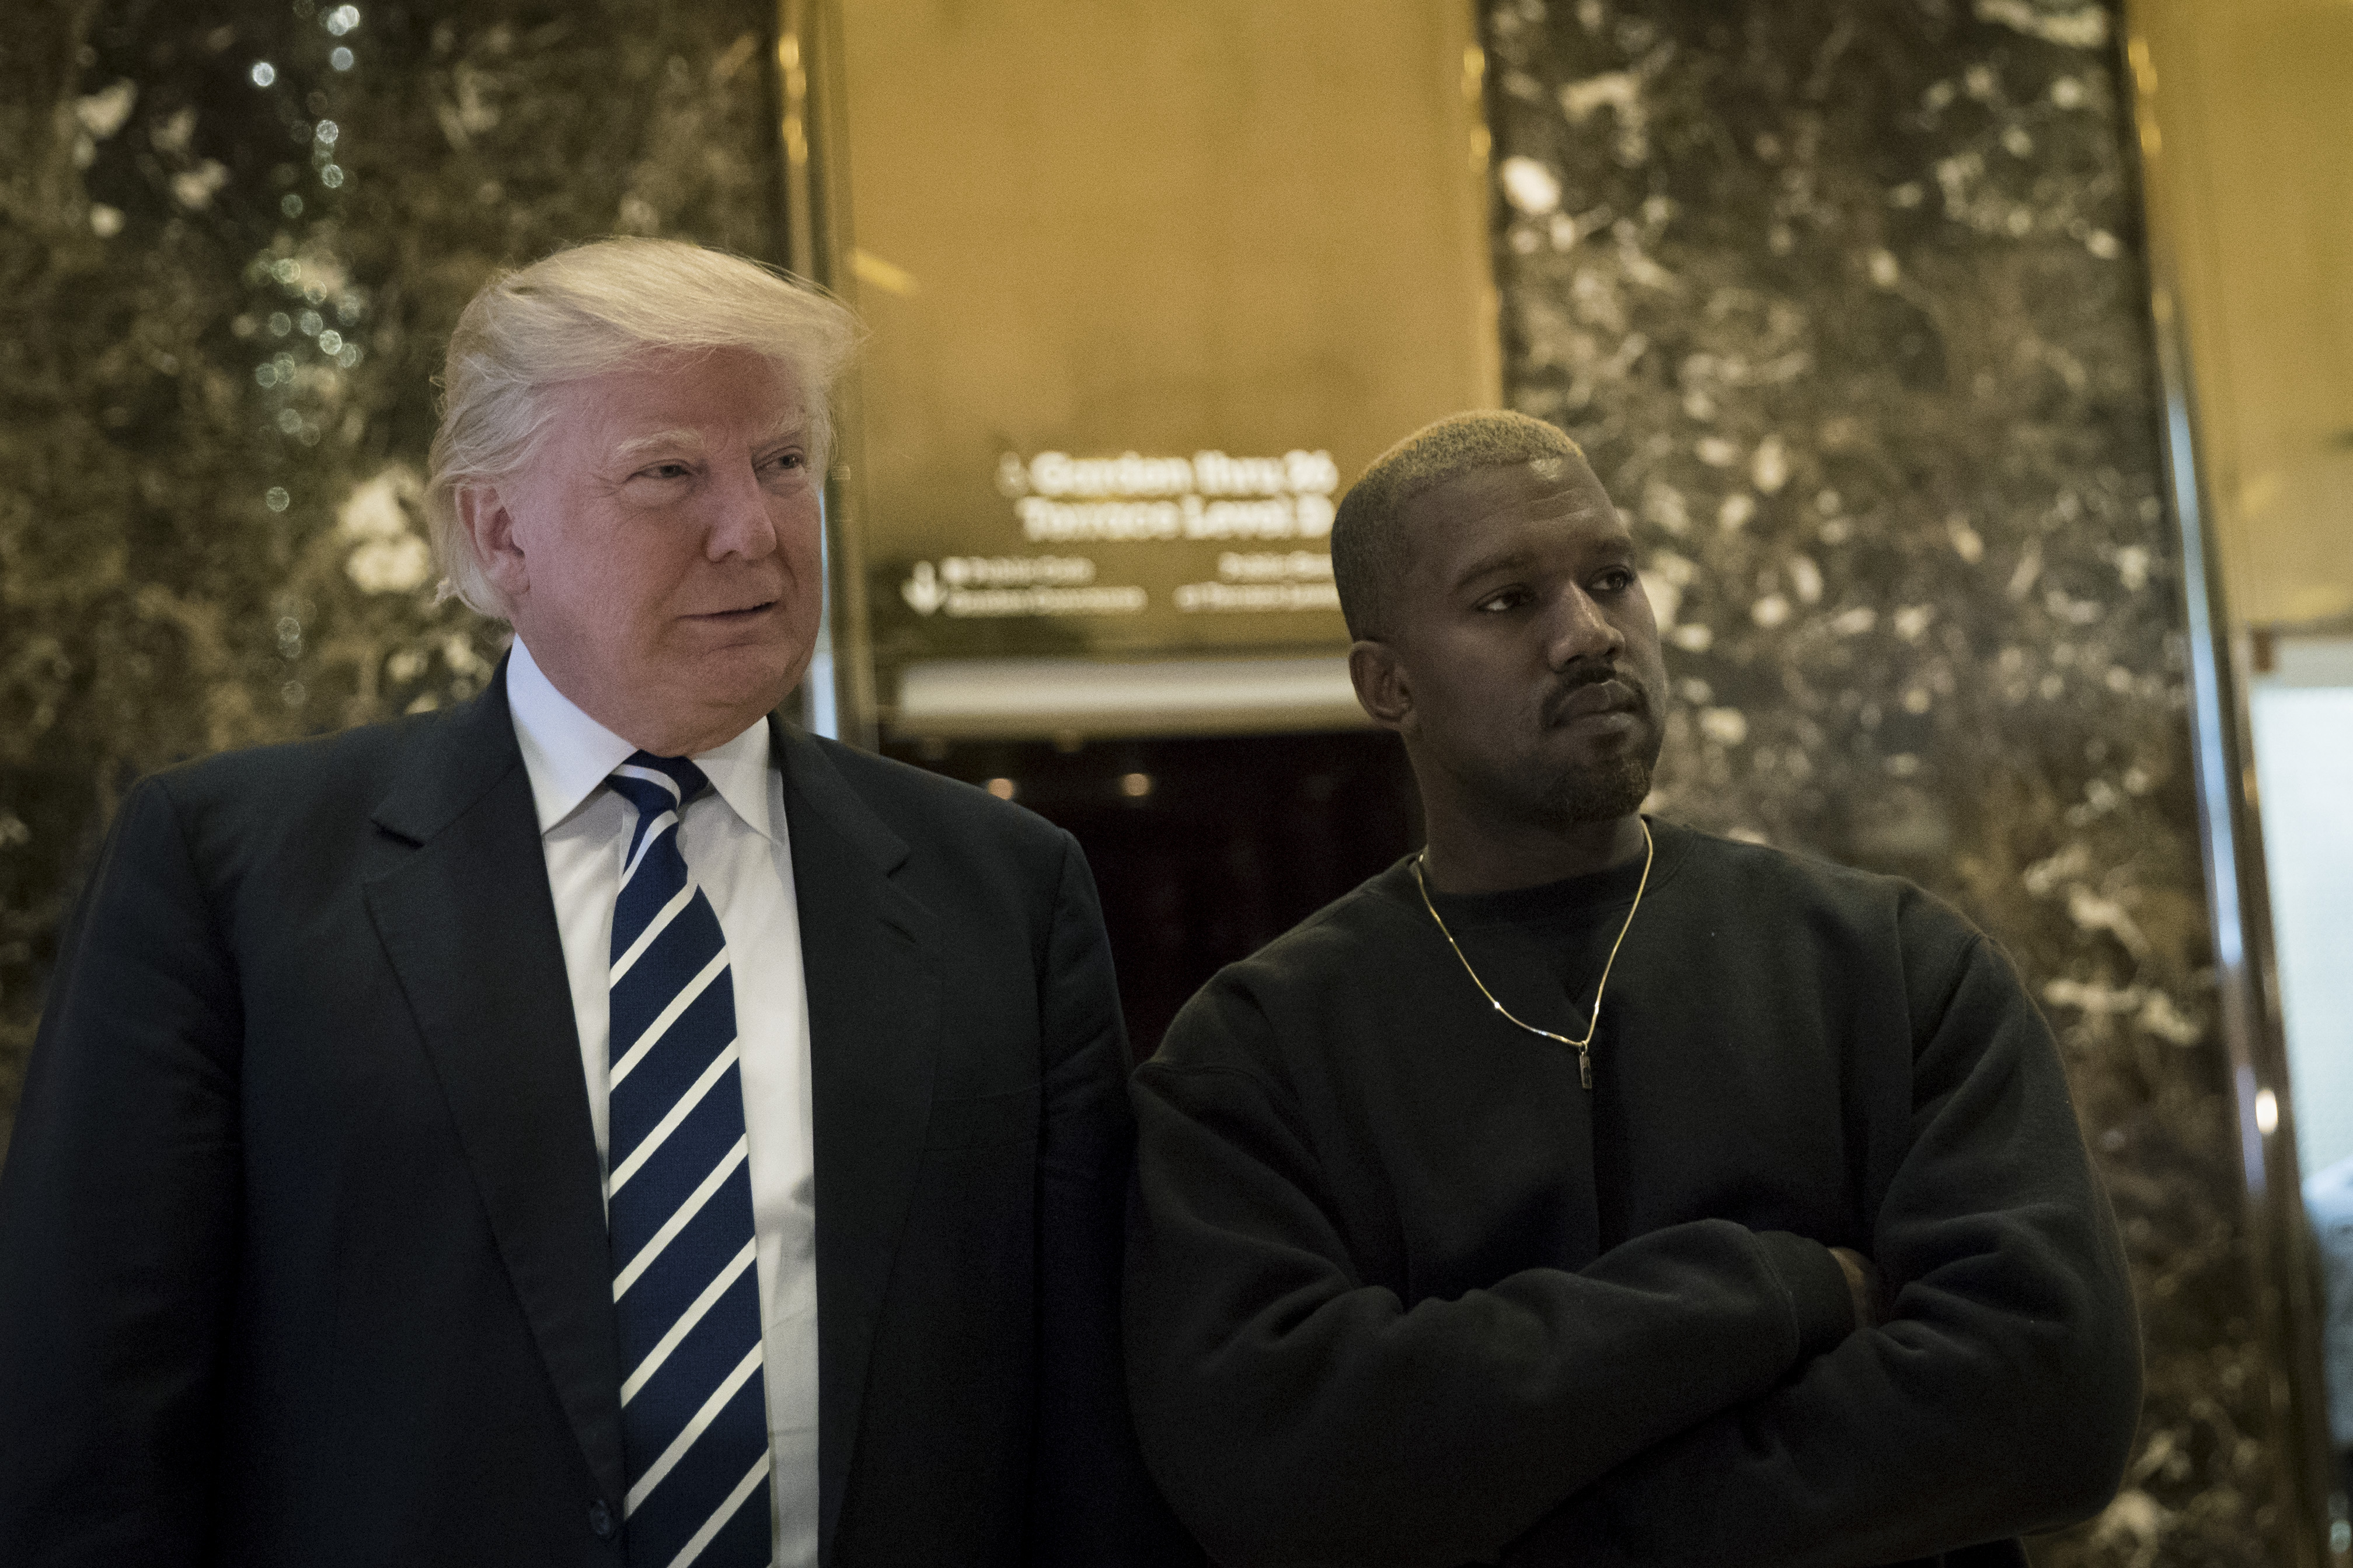 (L to R) President-elect Donald Trump and Kanye West stand together in the lobby at Trump Tower, December 13, 2016 in New York City. (Drew Angerer/Getty Images)